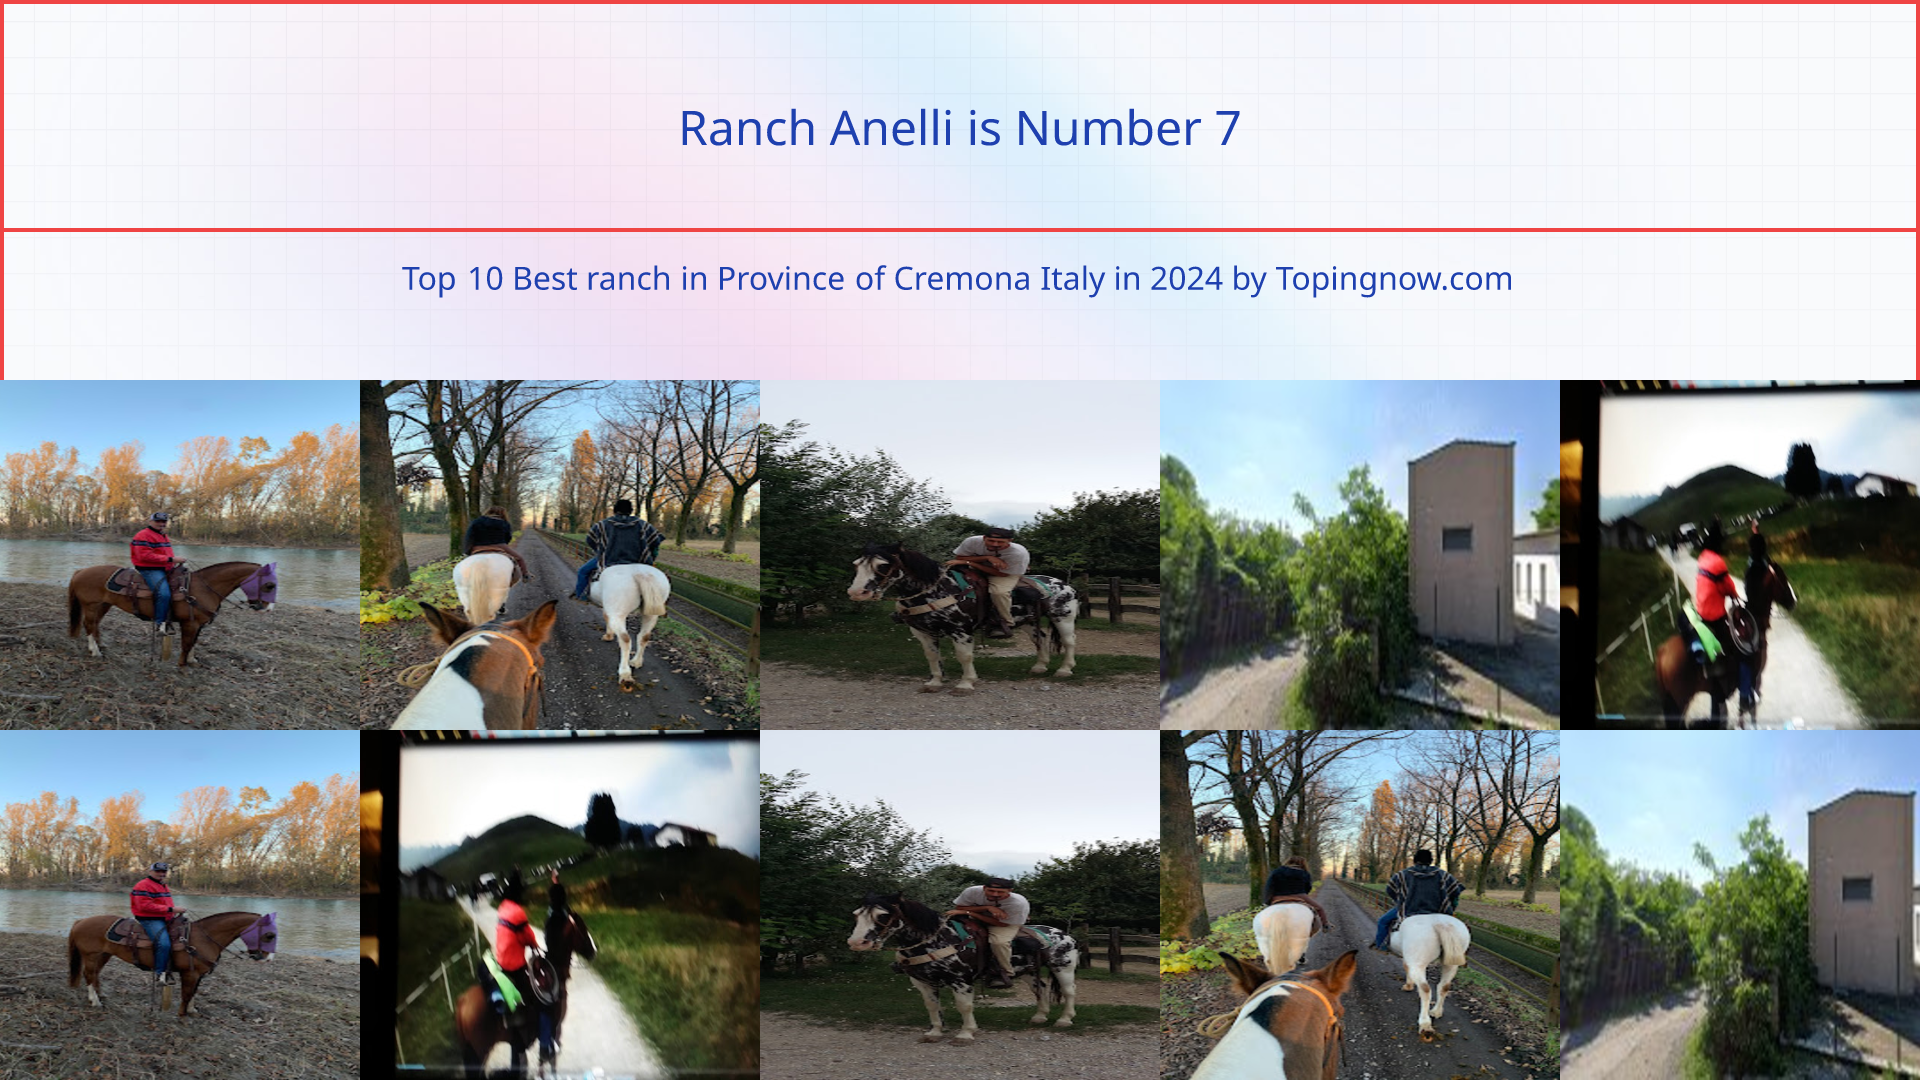 Ranch Anelli: Top 10 Best ranch in Province of Cremona Italy in 2024